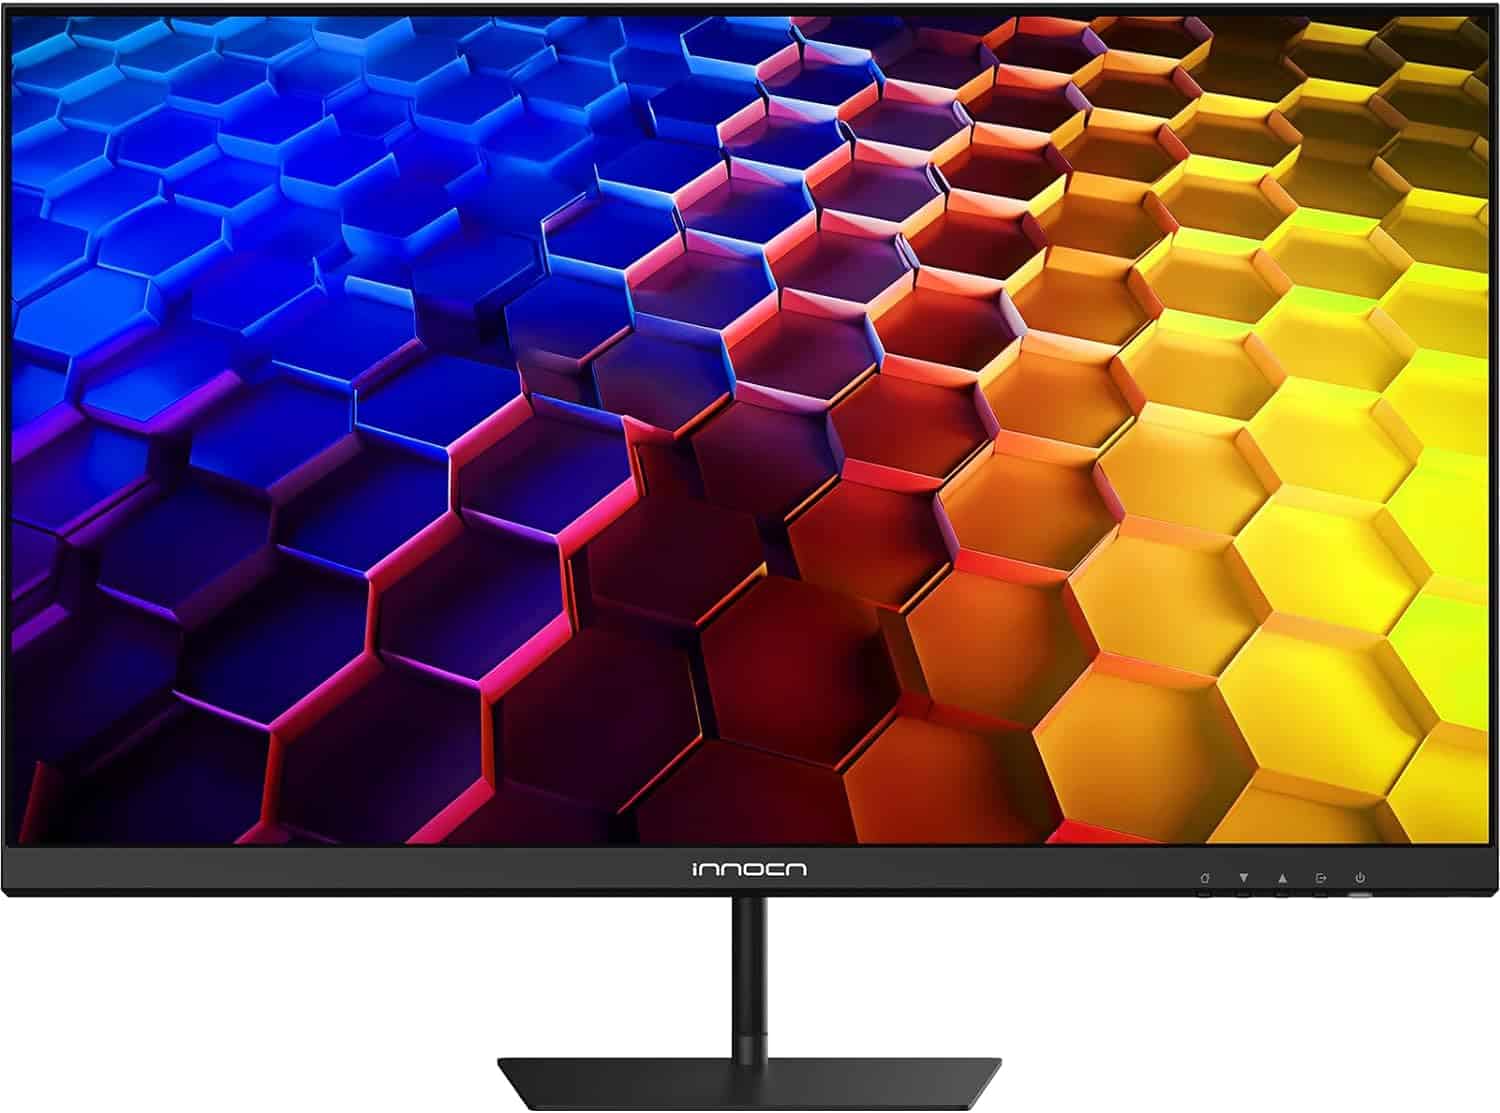 1080p, 1440p, 4K: Which monitor resolution should you choose